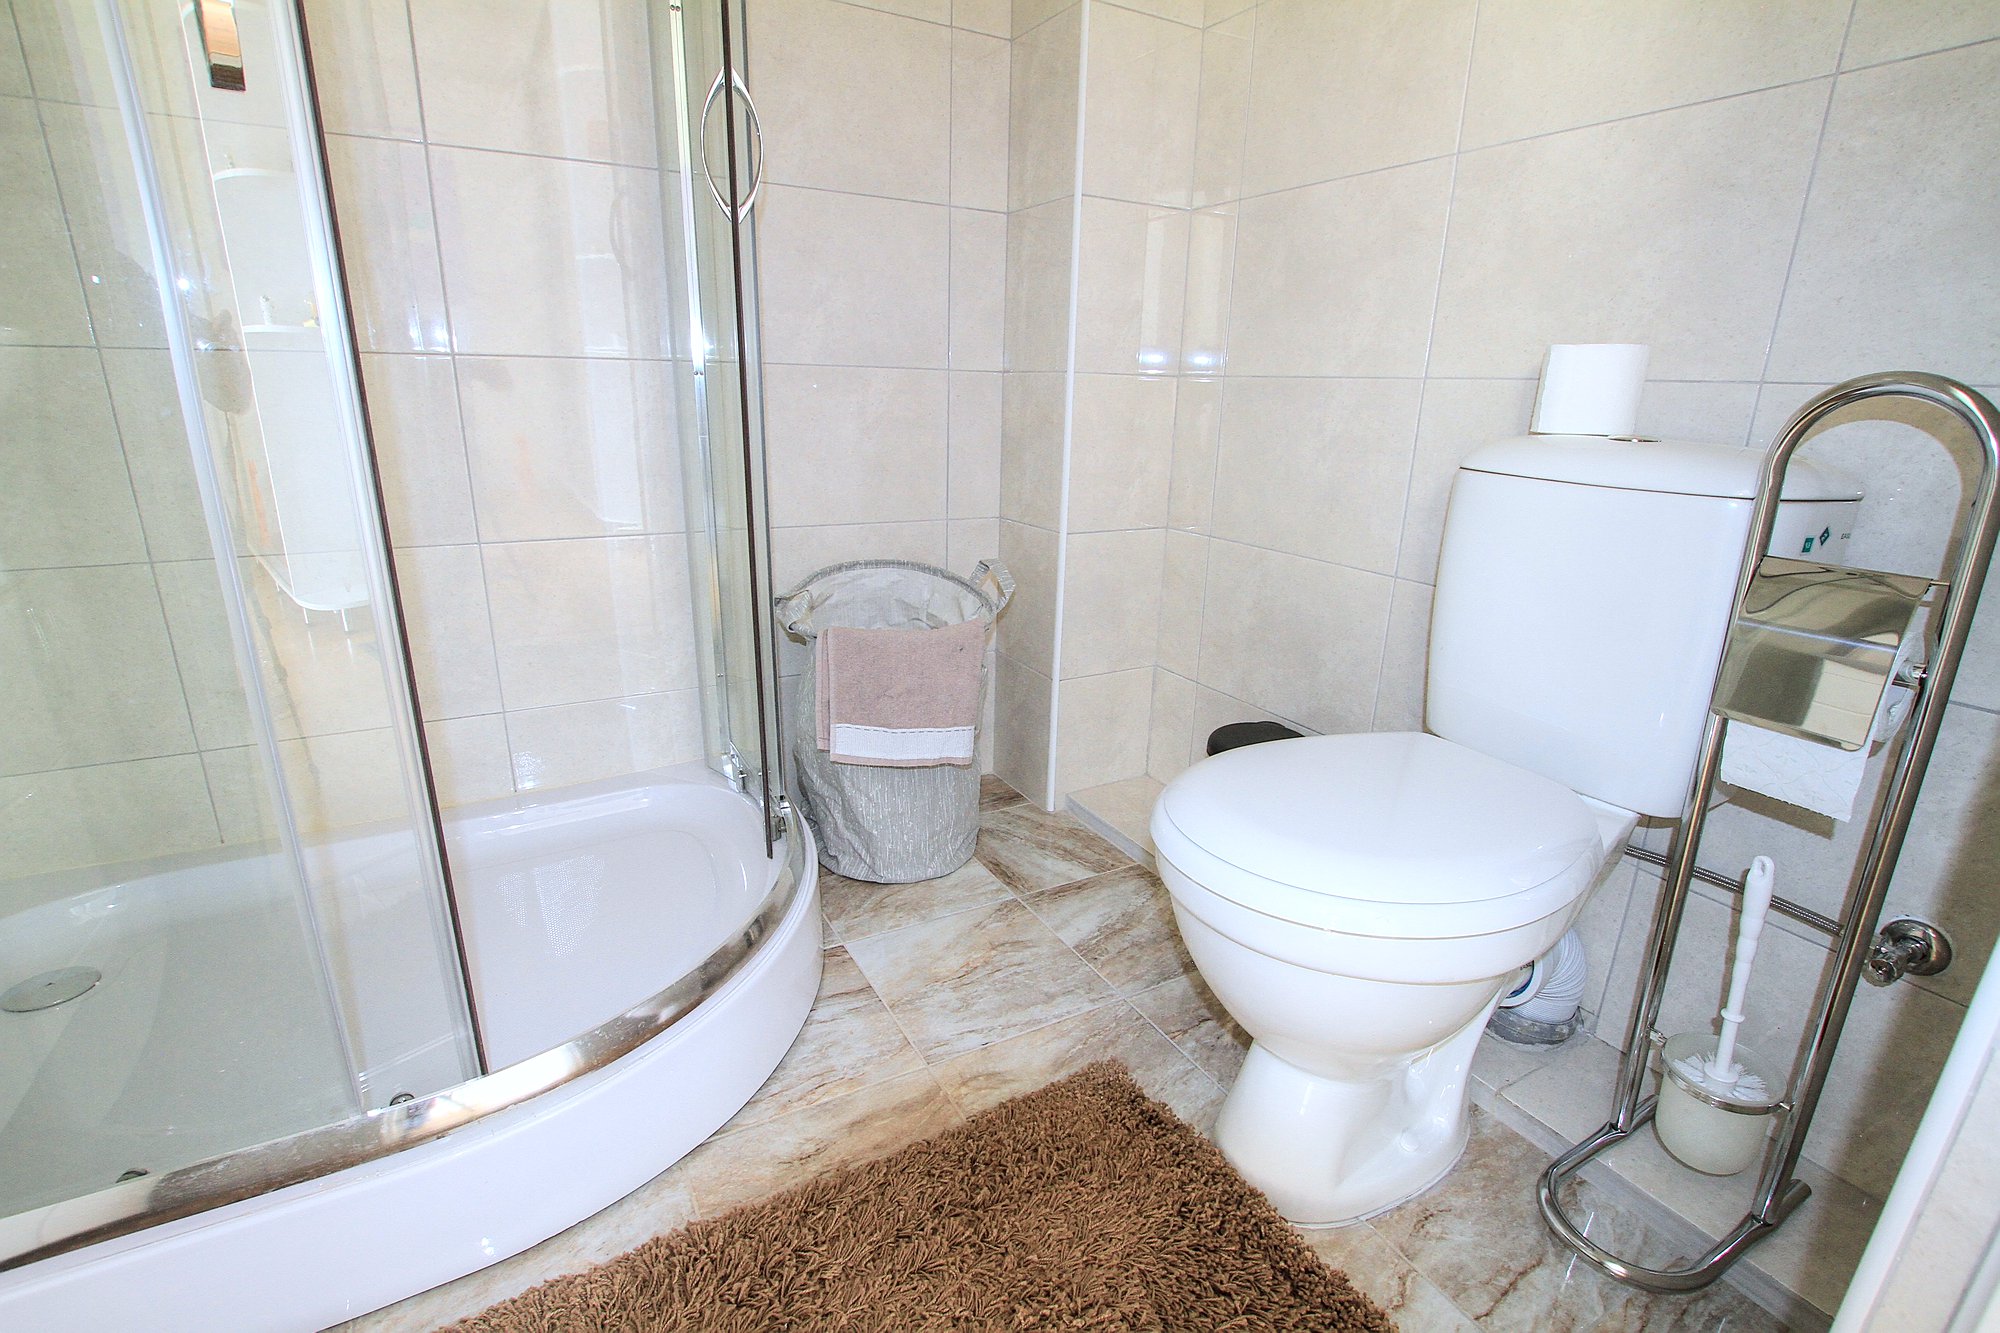 Old Town Studio is a 1 room apartment for rent in Chisinau, Moldova